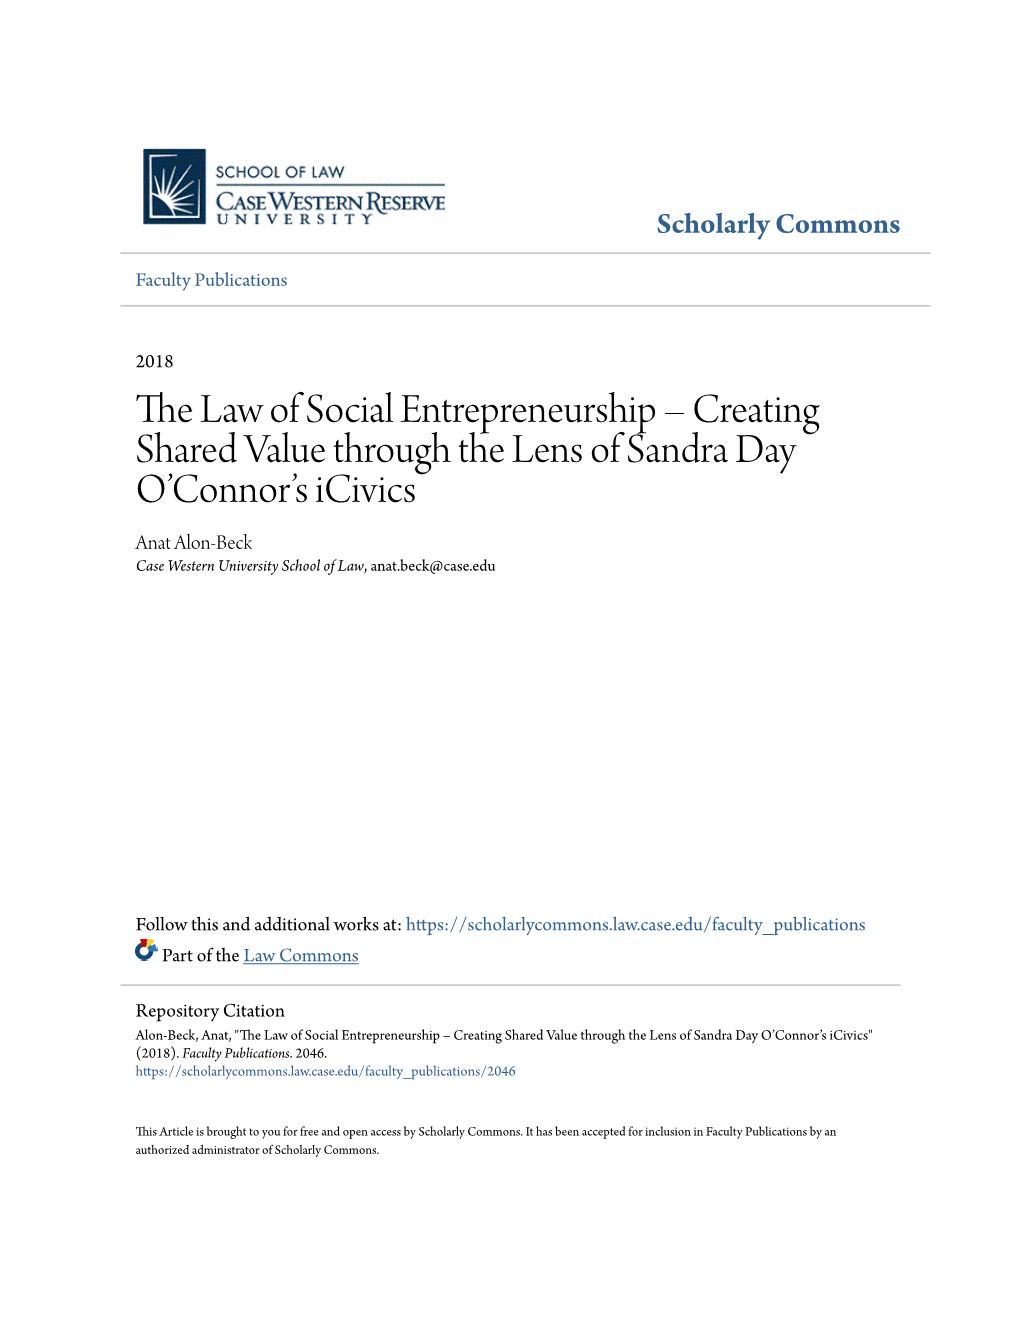 Creating Shared Value Through the Lens of Sandra Day O'connor's